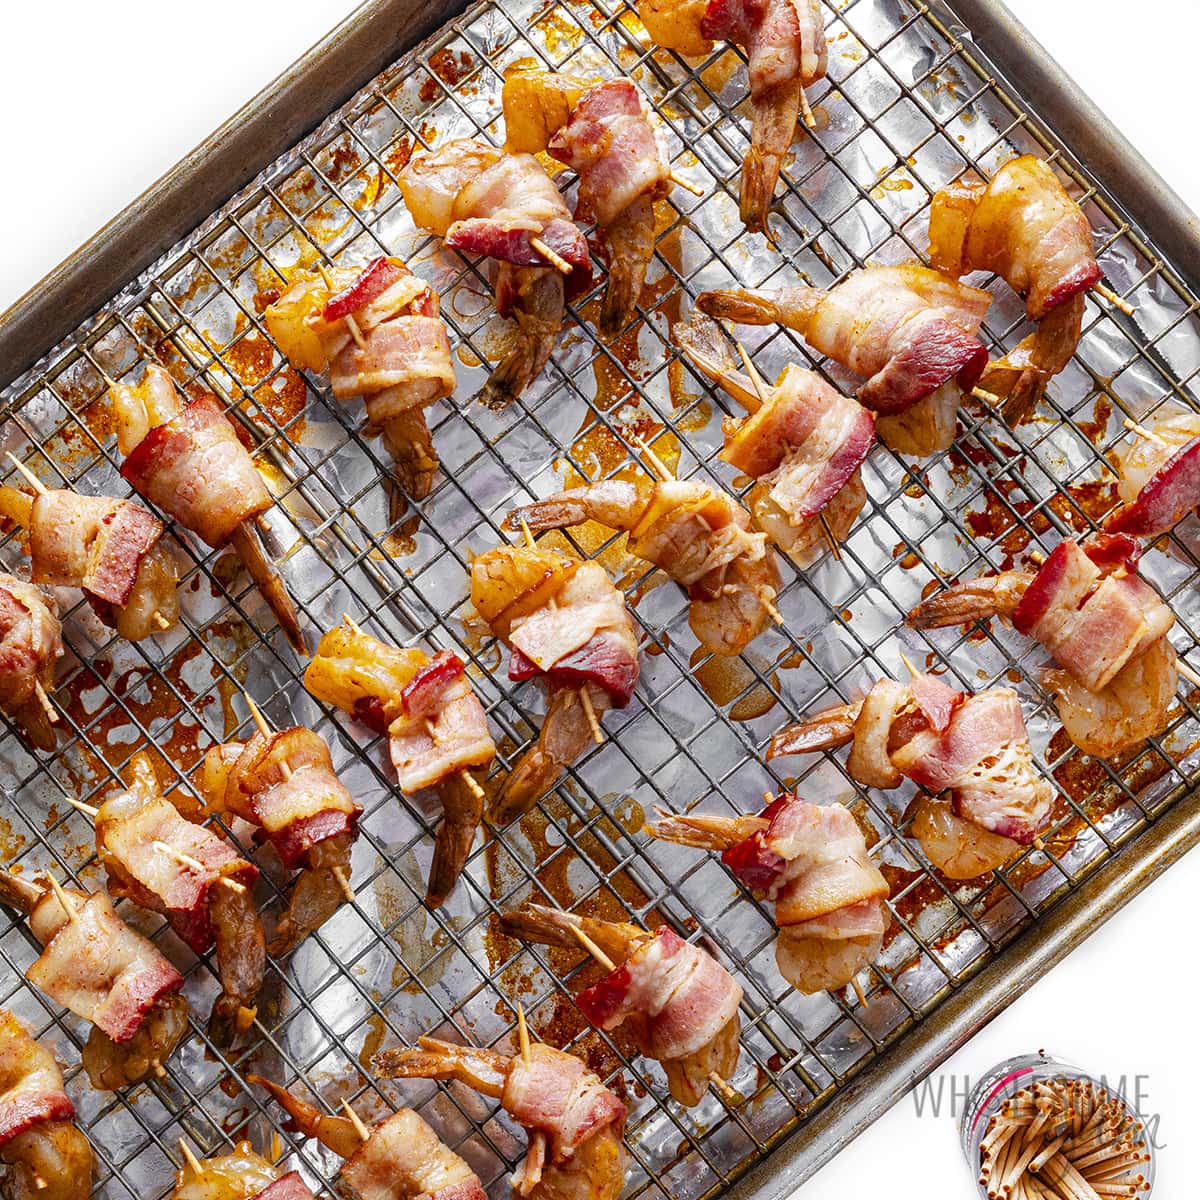 Shrimp wrapped with bacon on a baking sheet with a rack.